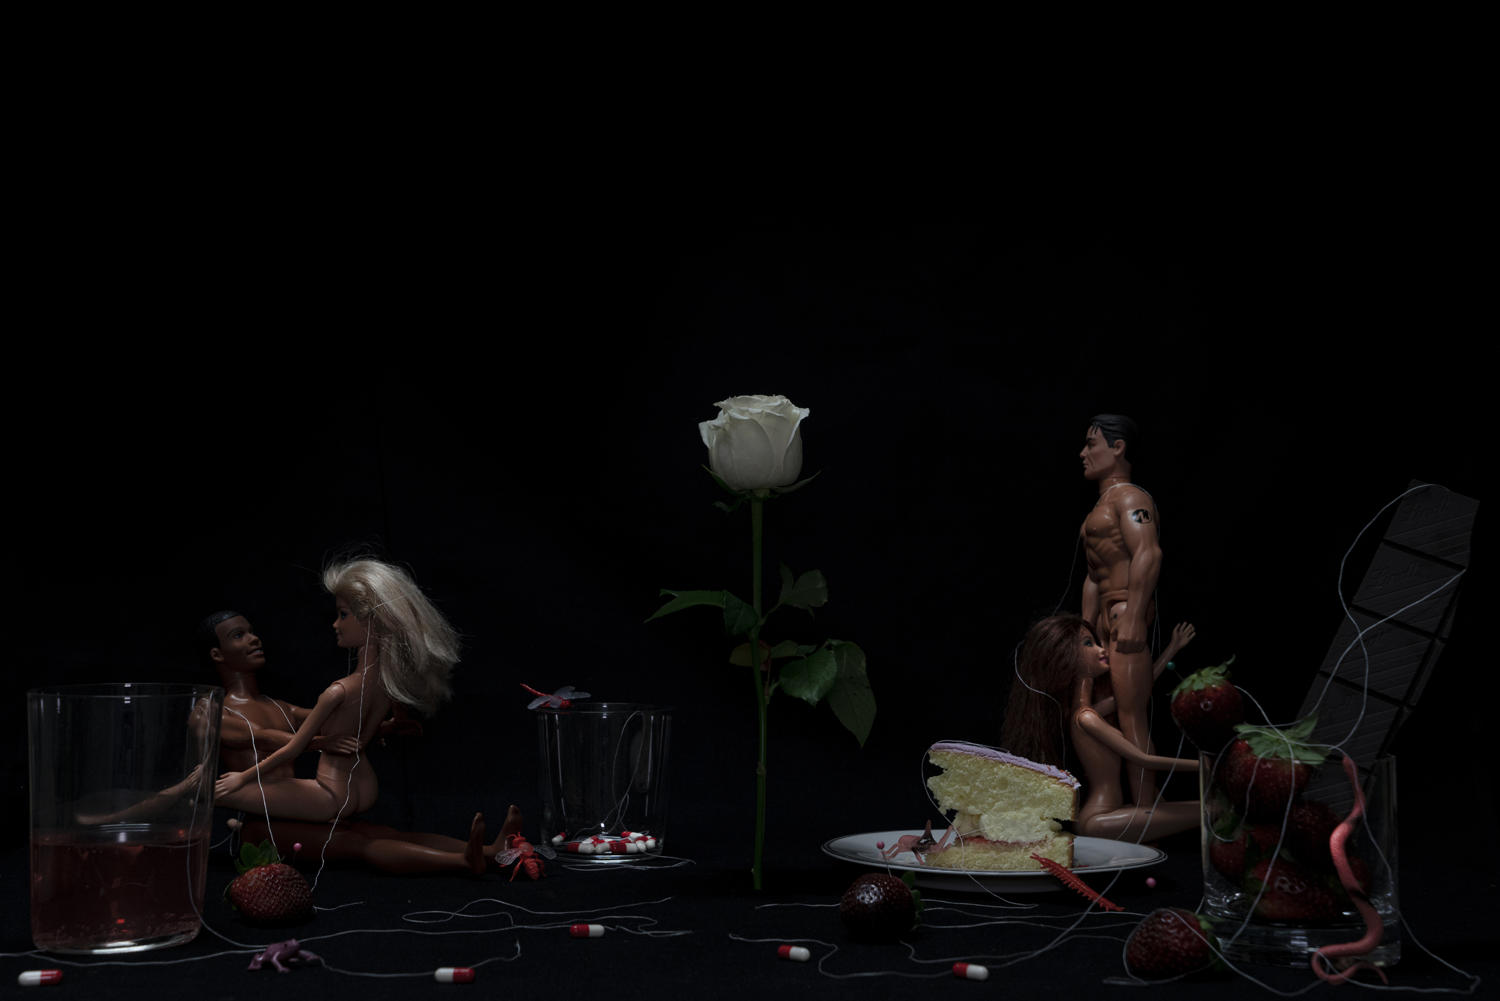 Dark digital photograph of a white rose amongst scattered items of pills, strawberries, a slice of cake, plastic insects, string, glasses filled with red liquid and two naked barbie couples.